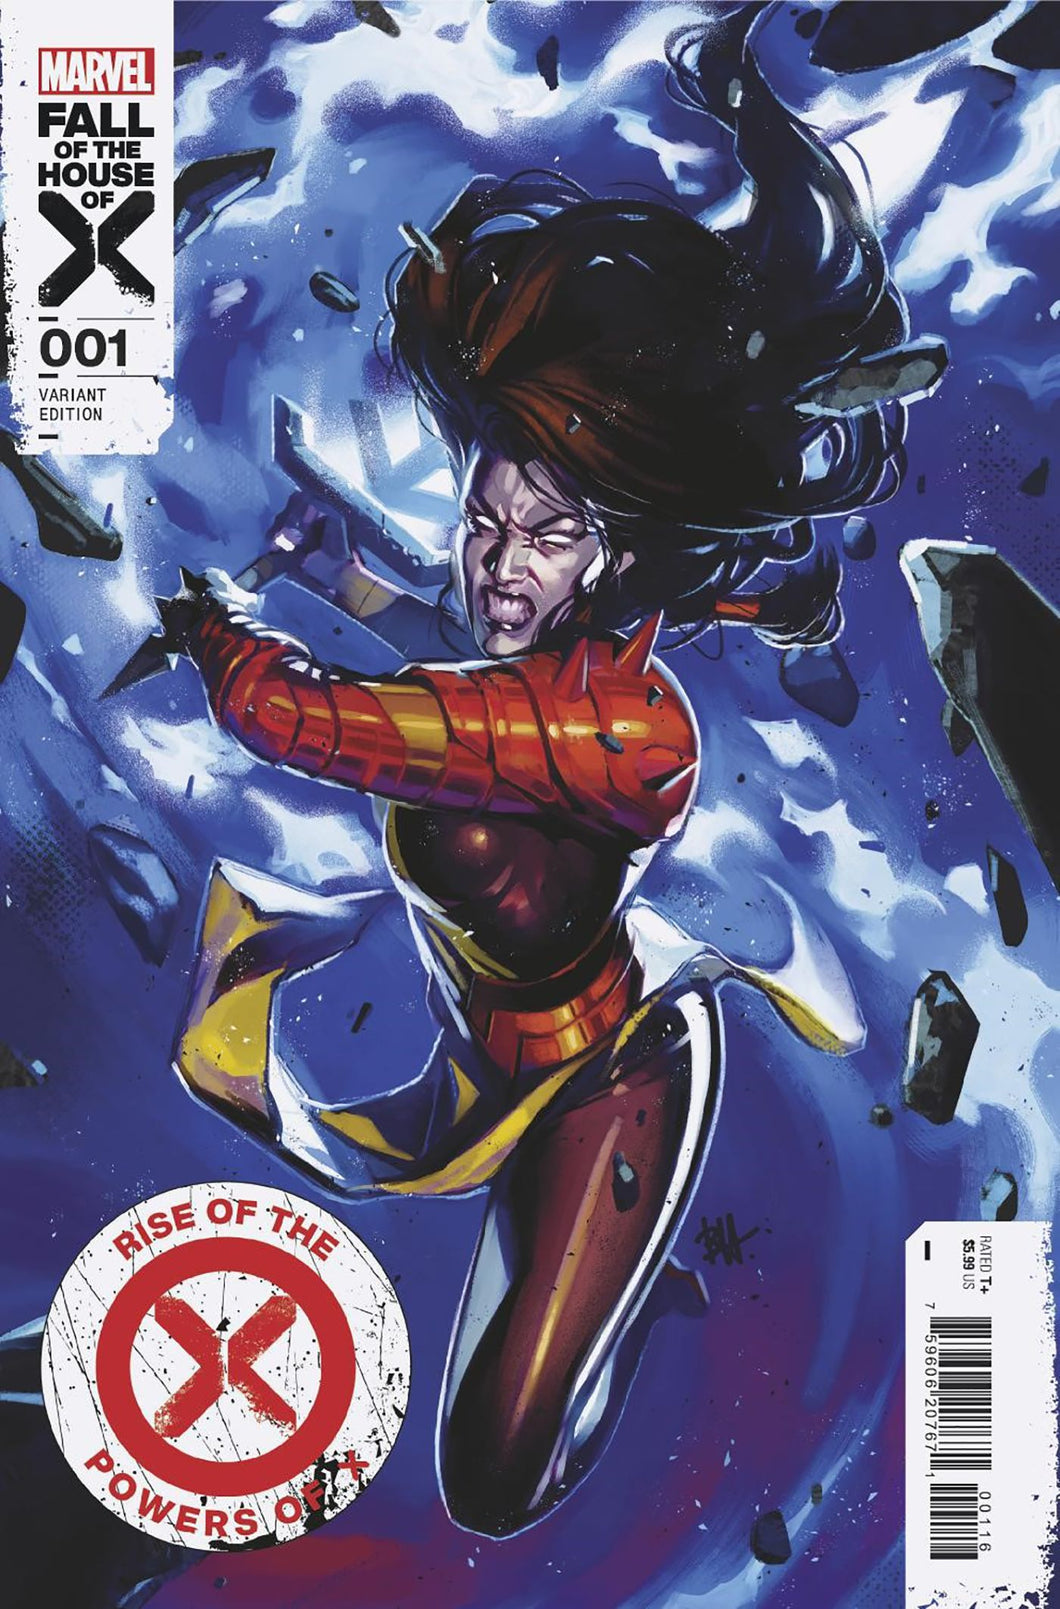 RISE OF THE POWERS OF X #1 (INCENTIVE 1:25 BEN HARVEY VARIANT)